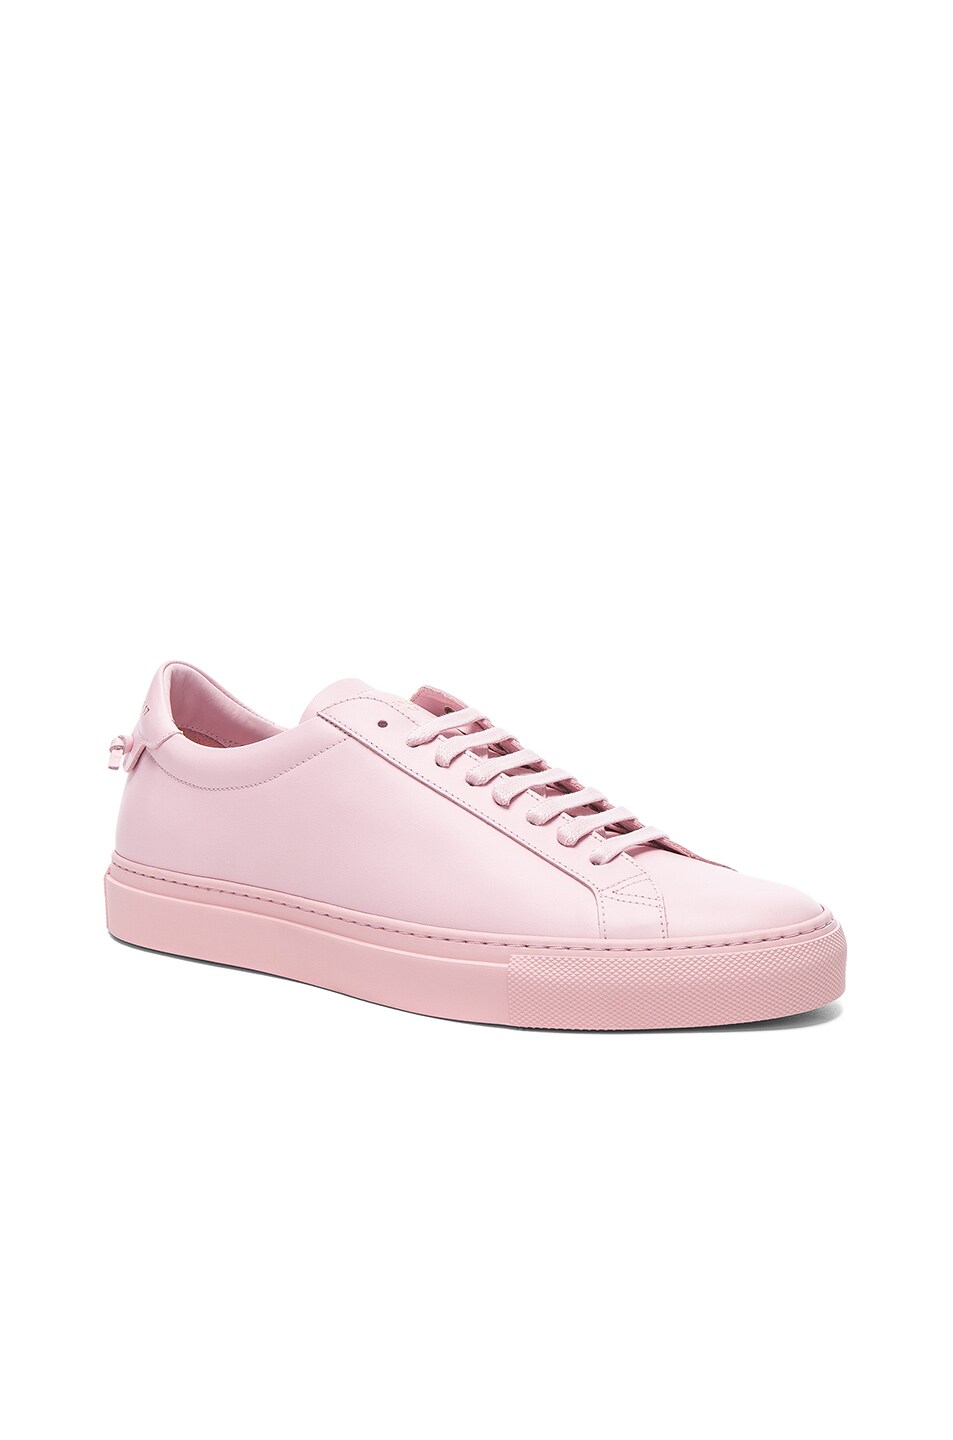 Image 1 of Givenchy Leather Urban Tie Knot Sneakers in Pale Pink